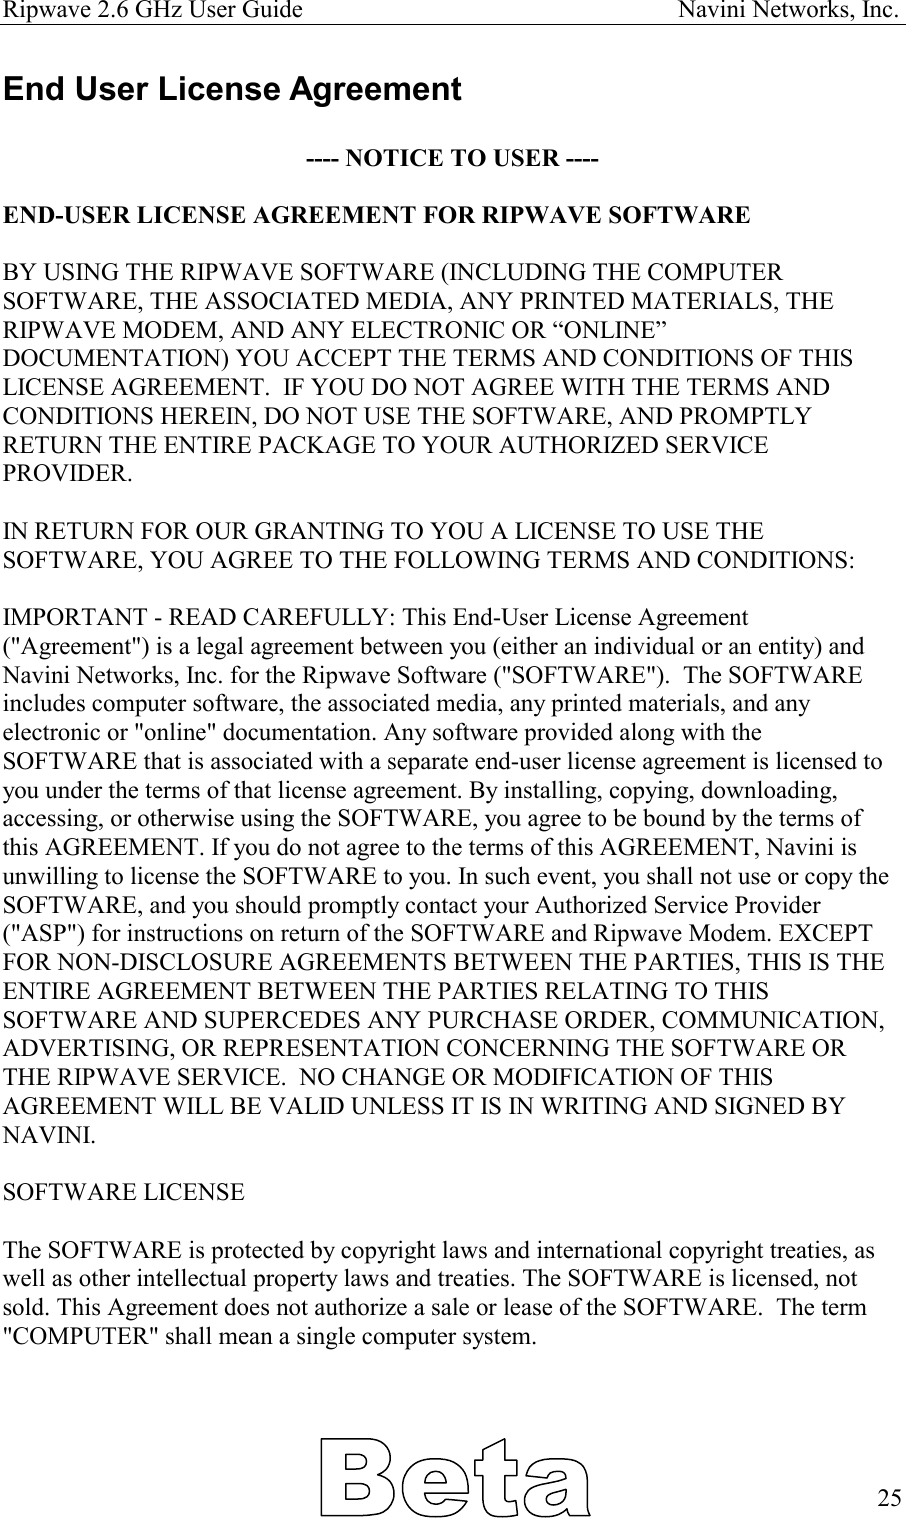 Ripwave 2.6 GHz User Guide                                                            Navini Networks, Inc. End User License Agreement  ---- NOTICE TO USER ----  END-USER LICENSE AGREEMENT FOR RIPWAVE SOFTWARE  BY USING THE RIPWAVE SOFTWARE (INCLUDING THE COMPUTER SOFTWARE, THE ASSOCIATED MEDIA, ANY PRINTED MATERIALS, THE RIPWAVE MODEM, AND ANY ELECTRONIC OR “ONLINE” DOCUMENTATION) YOU ACCEPT THE TERMS AND CONDITIONS OF THIS LICENSE AGREEMENT.  IF YOU DO NOT AGREE WITH THE TERMS AND CONDITIONS HEREIN, DO NOT USE THE SOFTWARE, AND PROMPTLY RETURN THE ENTIRE PACKAGE TO YOUR AUTHORIZED SERVICE PROVIDER.  IN RETURN FOR OUR GRANTING TO YOU A LICENSE TO USE THE SOFTWARE, YOU AGREE TO THE FOLLOWING TERMS AND CONDITIONS:  IMPORTANT - READ CAREFULLY: This End-User License Agreement (&quot;Agreement&quot;) is a legal agreement between you (either an individual or an entity) and Navini Networks, Inc. for the Ripwave Software (&quot;SOFTWARE&quot;).  The SOFTWARE includes computer software, the associated media, any printed materials, and any electronic or &quot;online&quot; documentation. Any software provided along with the SOFTWARE that is associated with a separate end-user license agreement is licensed to you under the terms of that license agreement. By installing, copying, downloading, accessing, or otherwise using the SOFTWARE, you agree to be bound by the terms of this AGREEMENT. If you do not agree to the terms of this AGREEMENT, Navini is unwilling to license the SOFTWARE to you. In such event, you shall not use or copy the SOFTWARE, and you should promptly contact your Authorized Service Provider (&quot;ASP&quot;) for instructions on return of the SOFTWARE and Ripwave Modem. EXCEPT FOR NON-DISCLOSURE AGREEMENTS BETWEEN THE PARTIES, THIS IS THE ENTIRE AGREEMENT BETWEEN THE PARTIES RELATING TO THIS SOFTWARE AND SUPERCEDES ANY PURCHASE ORDER, COMMUNICATION, ADVERTISING, OR REPRESENTATION CONCERNING THE SOFTWARE OR THE RIPWAVE SERVICE.  NO CHANGE OR MODIFICATION OF THIS AGREEMENT WILL BE VALID UNLESS IT IS IN WRITING AND SIGNED BY NAVINI.  SOFTWARE LICENSE  The SOFTWARE is protected by copyright laws and international copyright treaties, as well as other intellectual property laws and treaties. The SOFTWARE is licensed, not sold. This Agreement does not authorize a sale or lease of the SOFTWARE.  The term &quot;COMPUTER&quot; shall mean a single computer system.       25